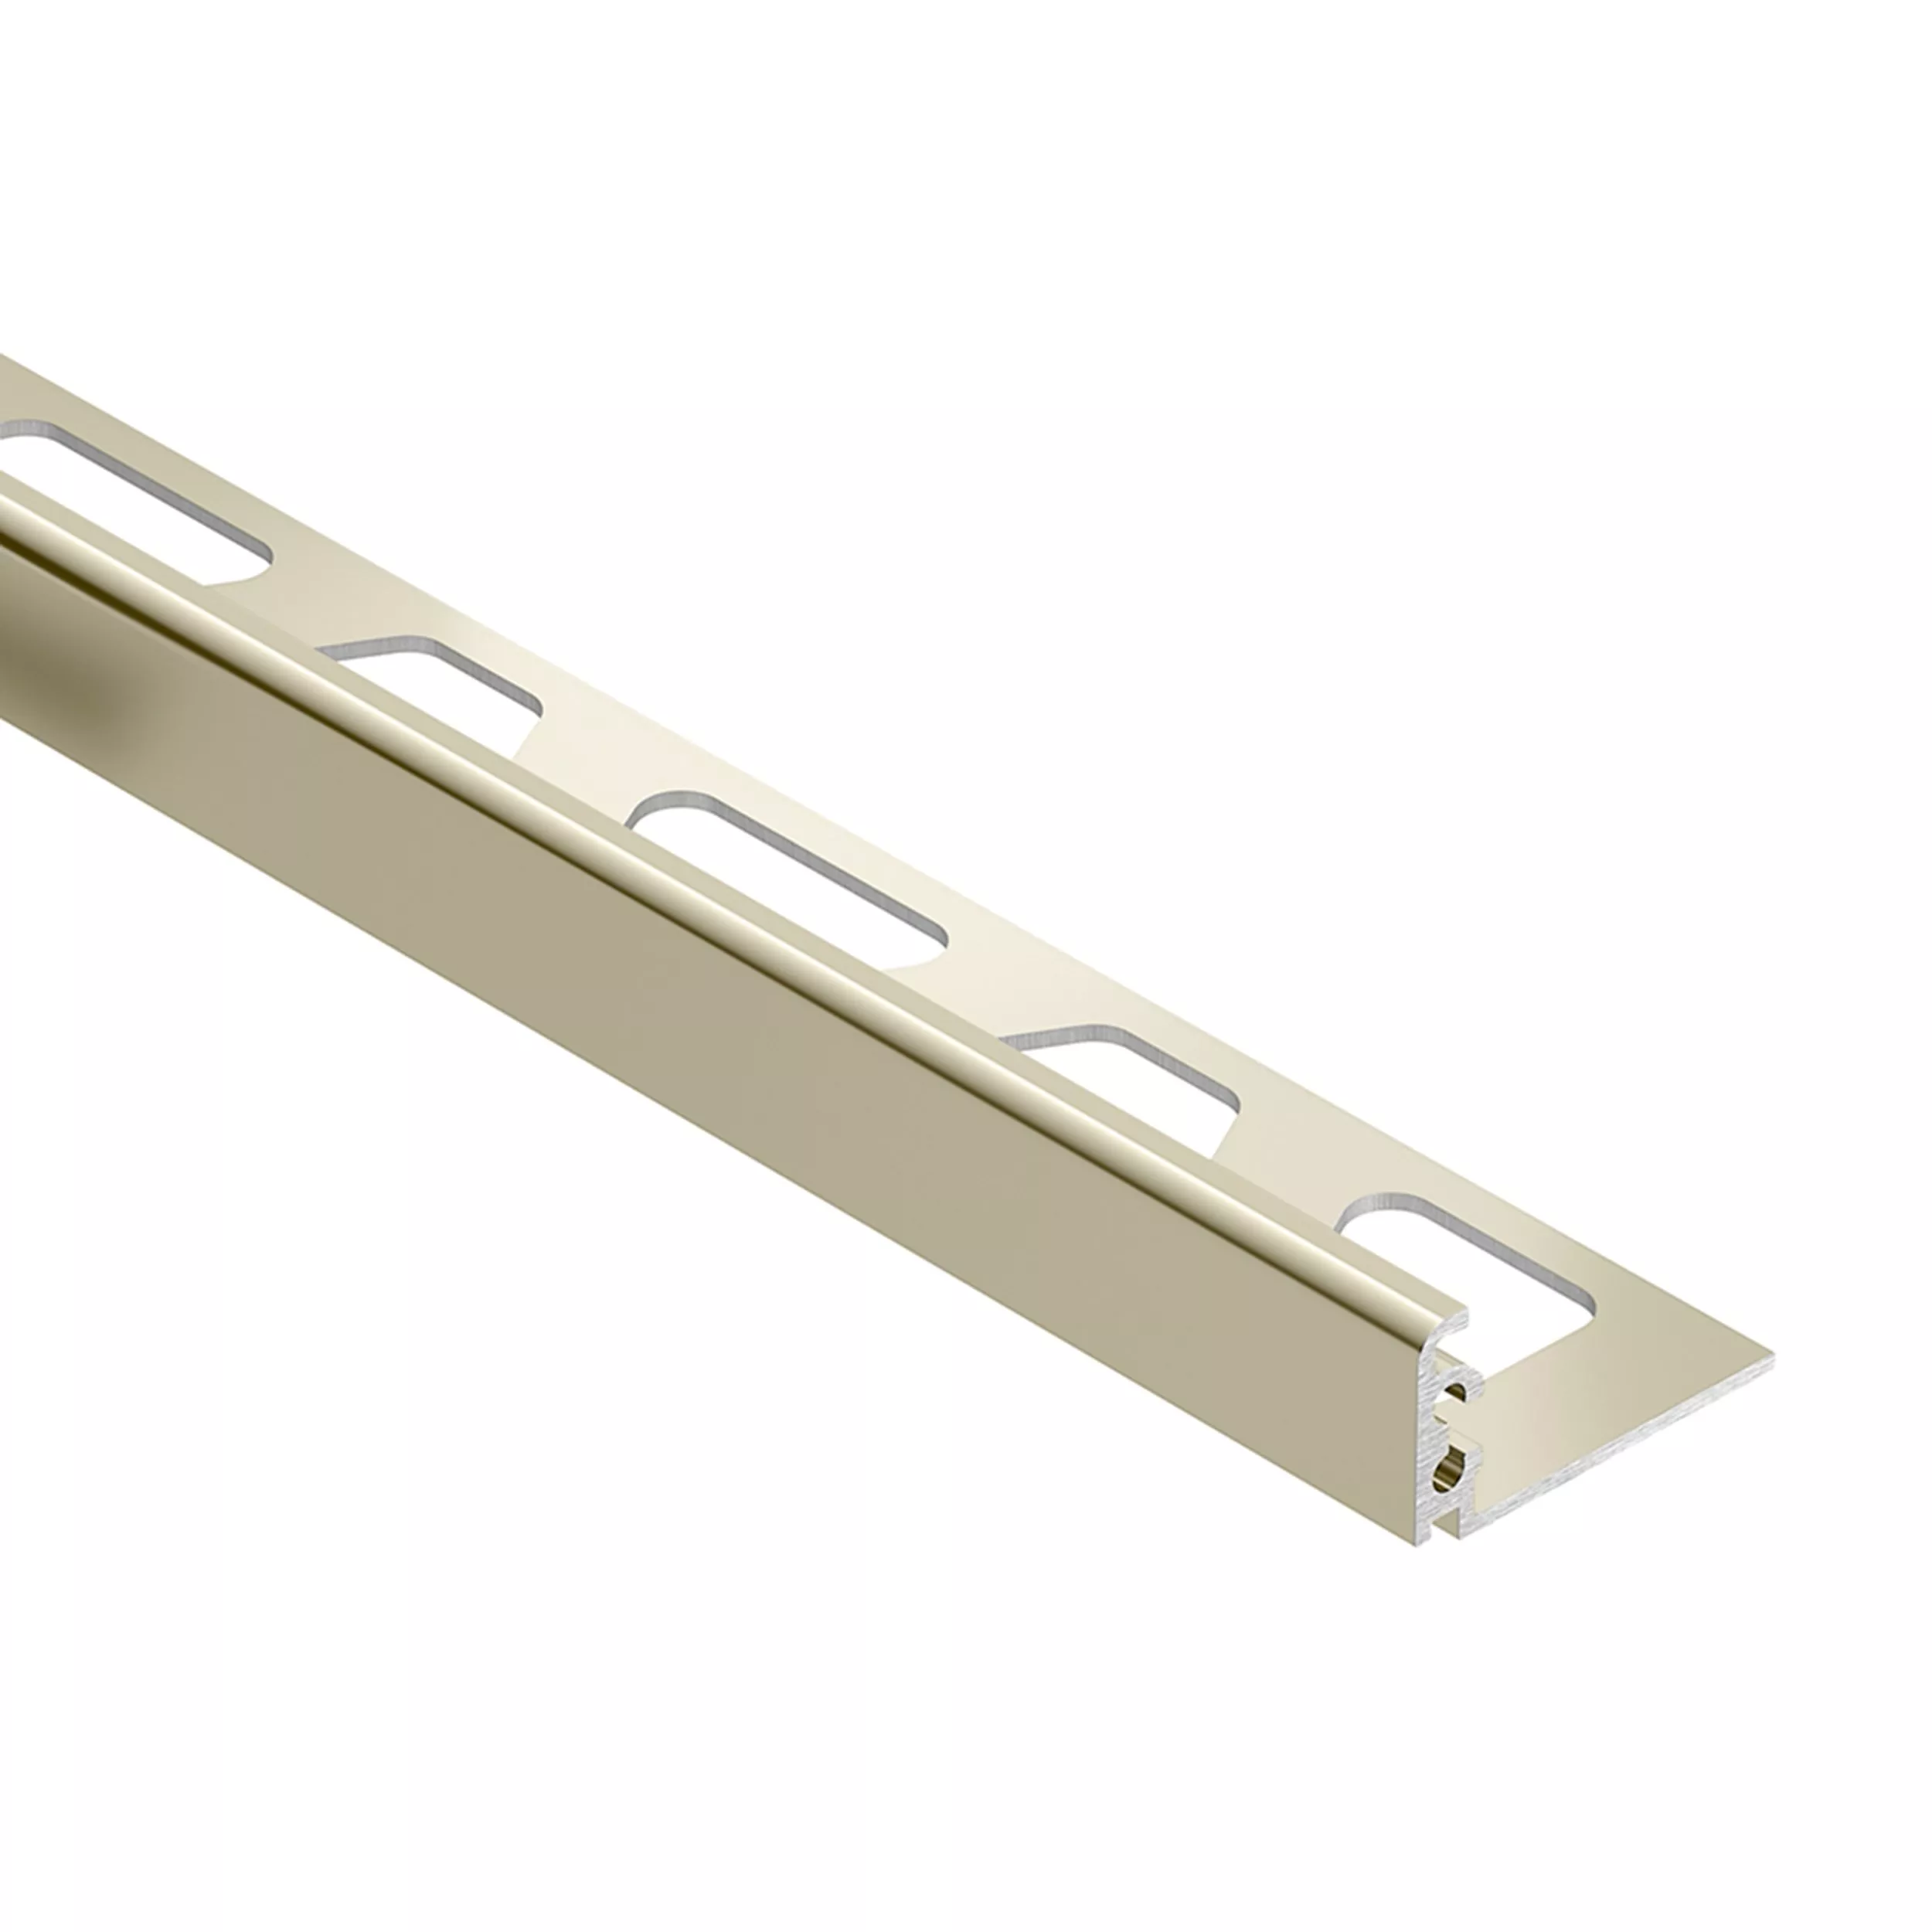 Schluter Jolly Edge Trim 1/2in. Anodized Aluminum Polished Nickel